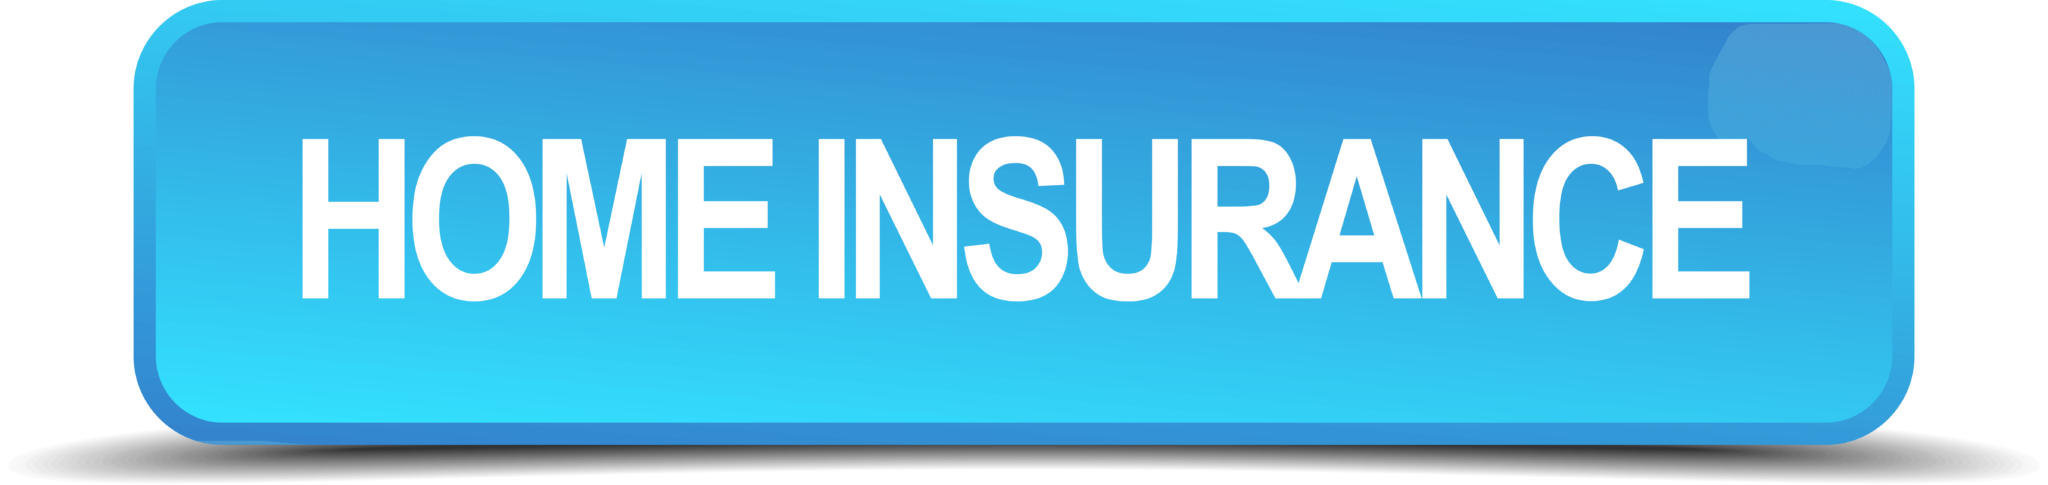 Home Insurance Quote